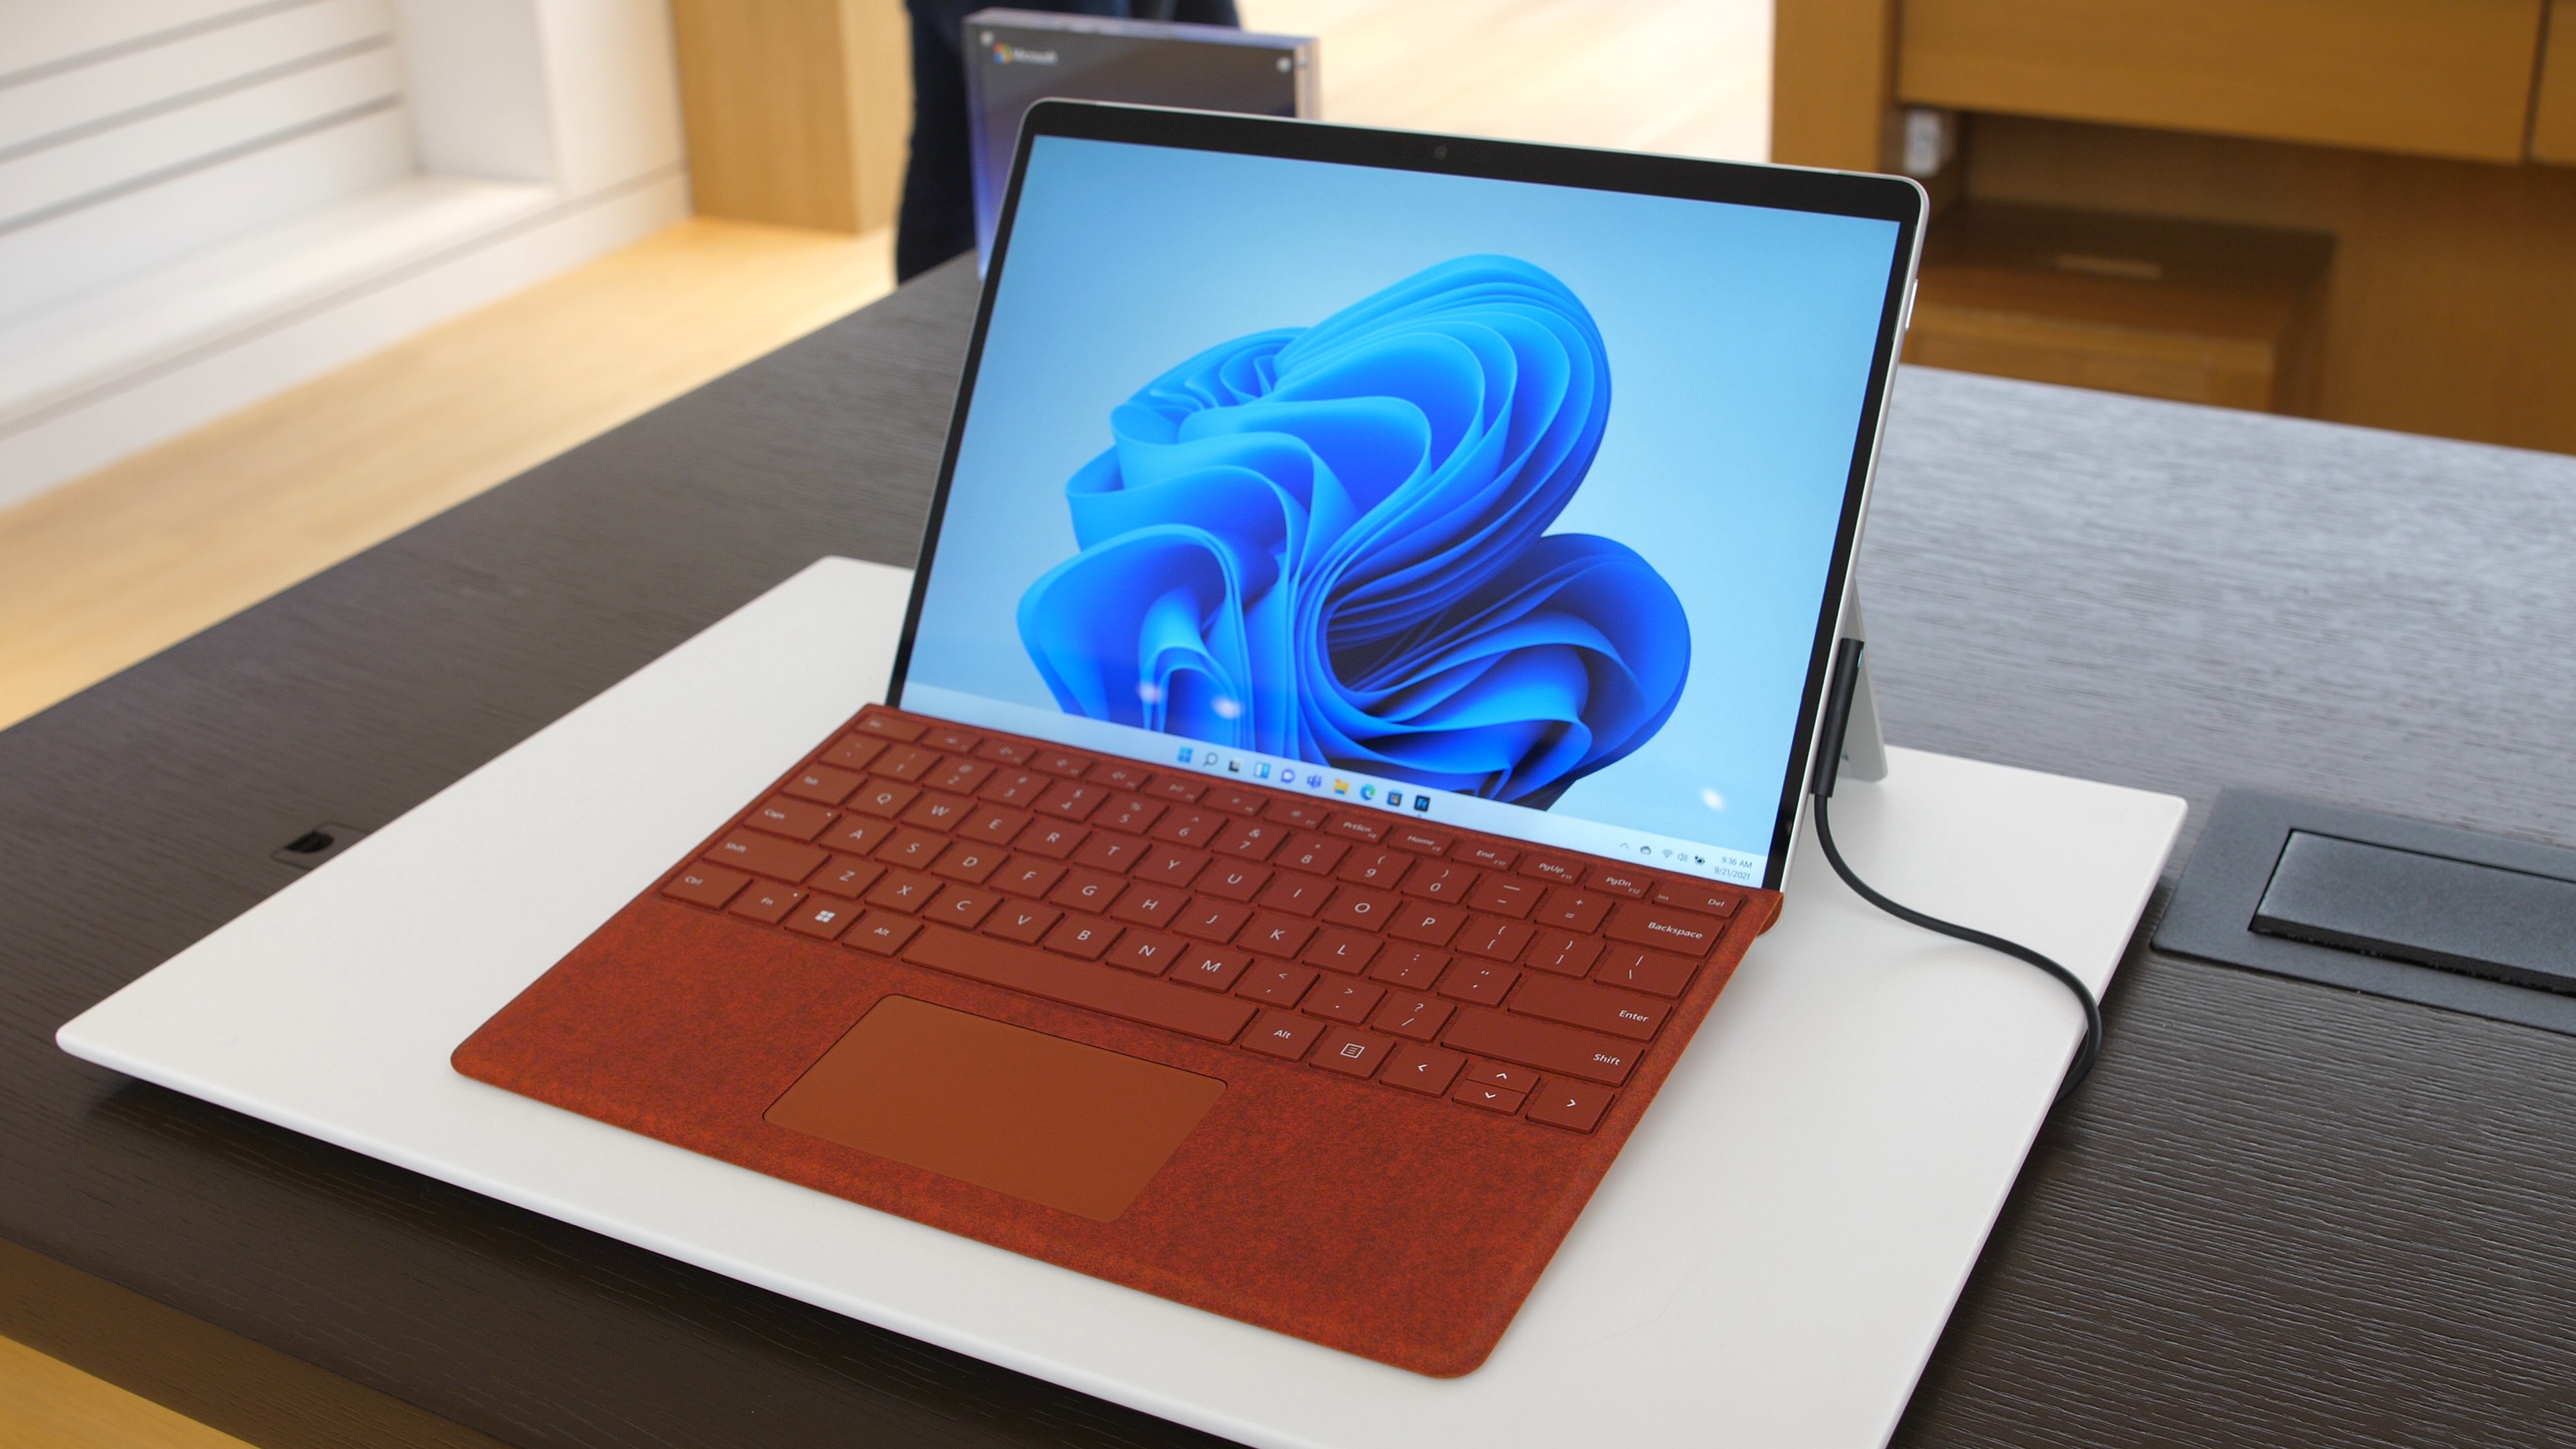 Microsoft Surface Pro 8 review: A fine laptop if you buy the keyboard